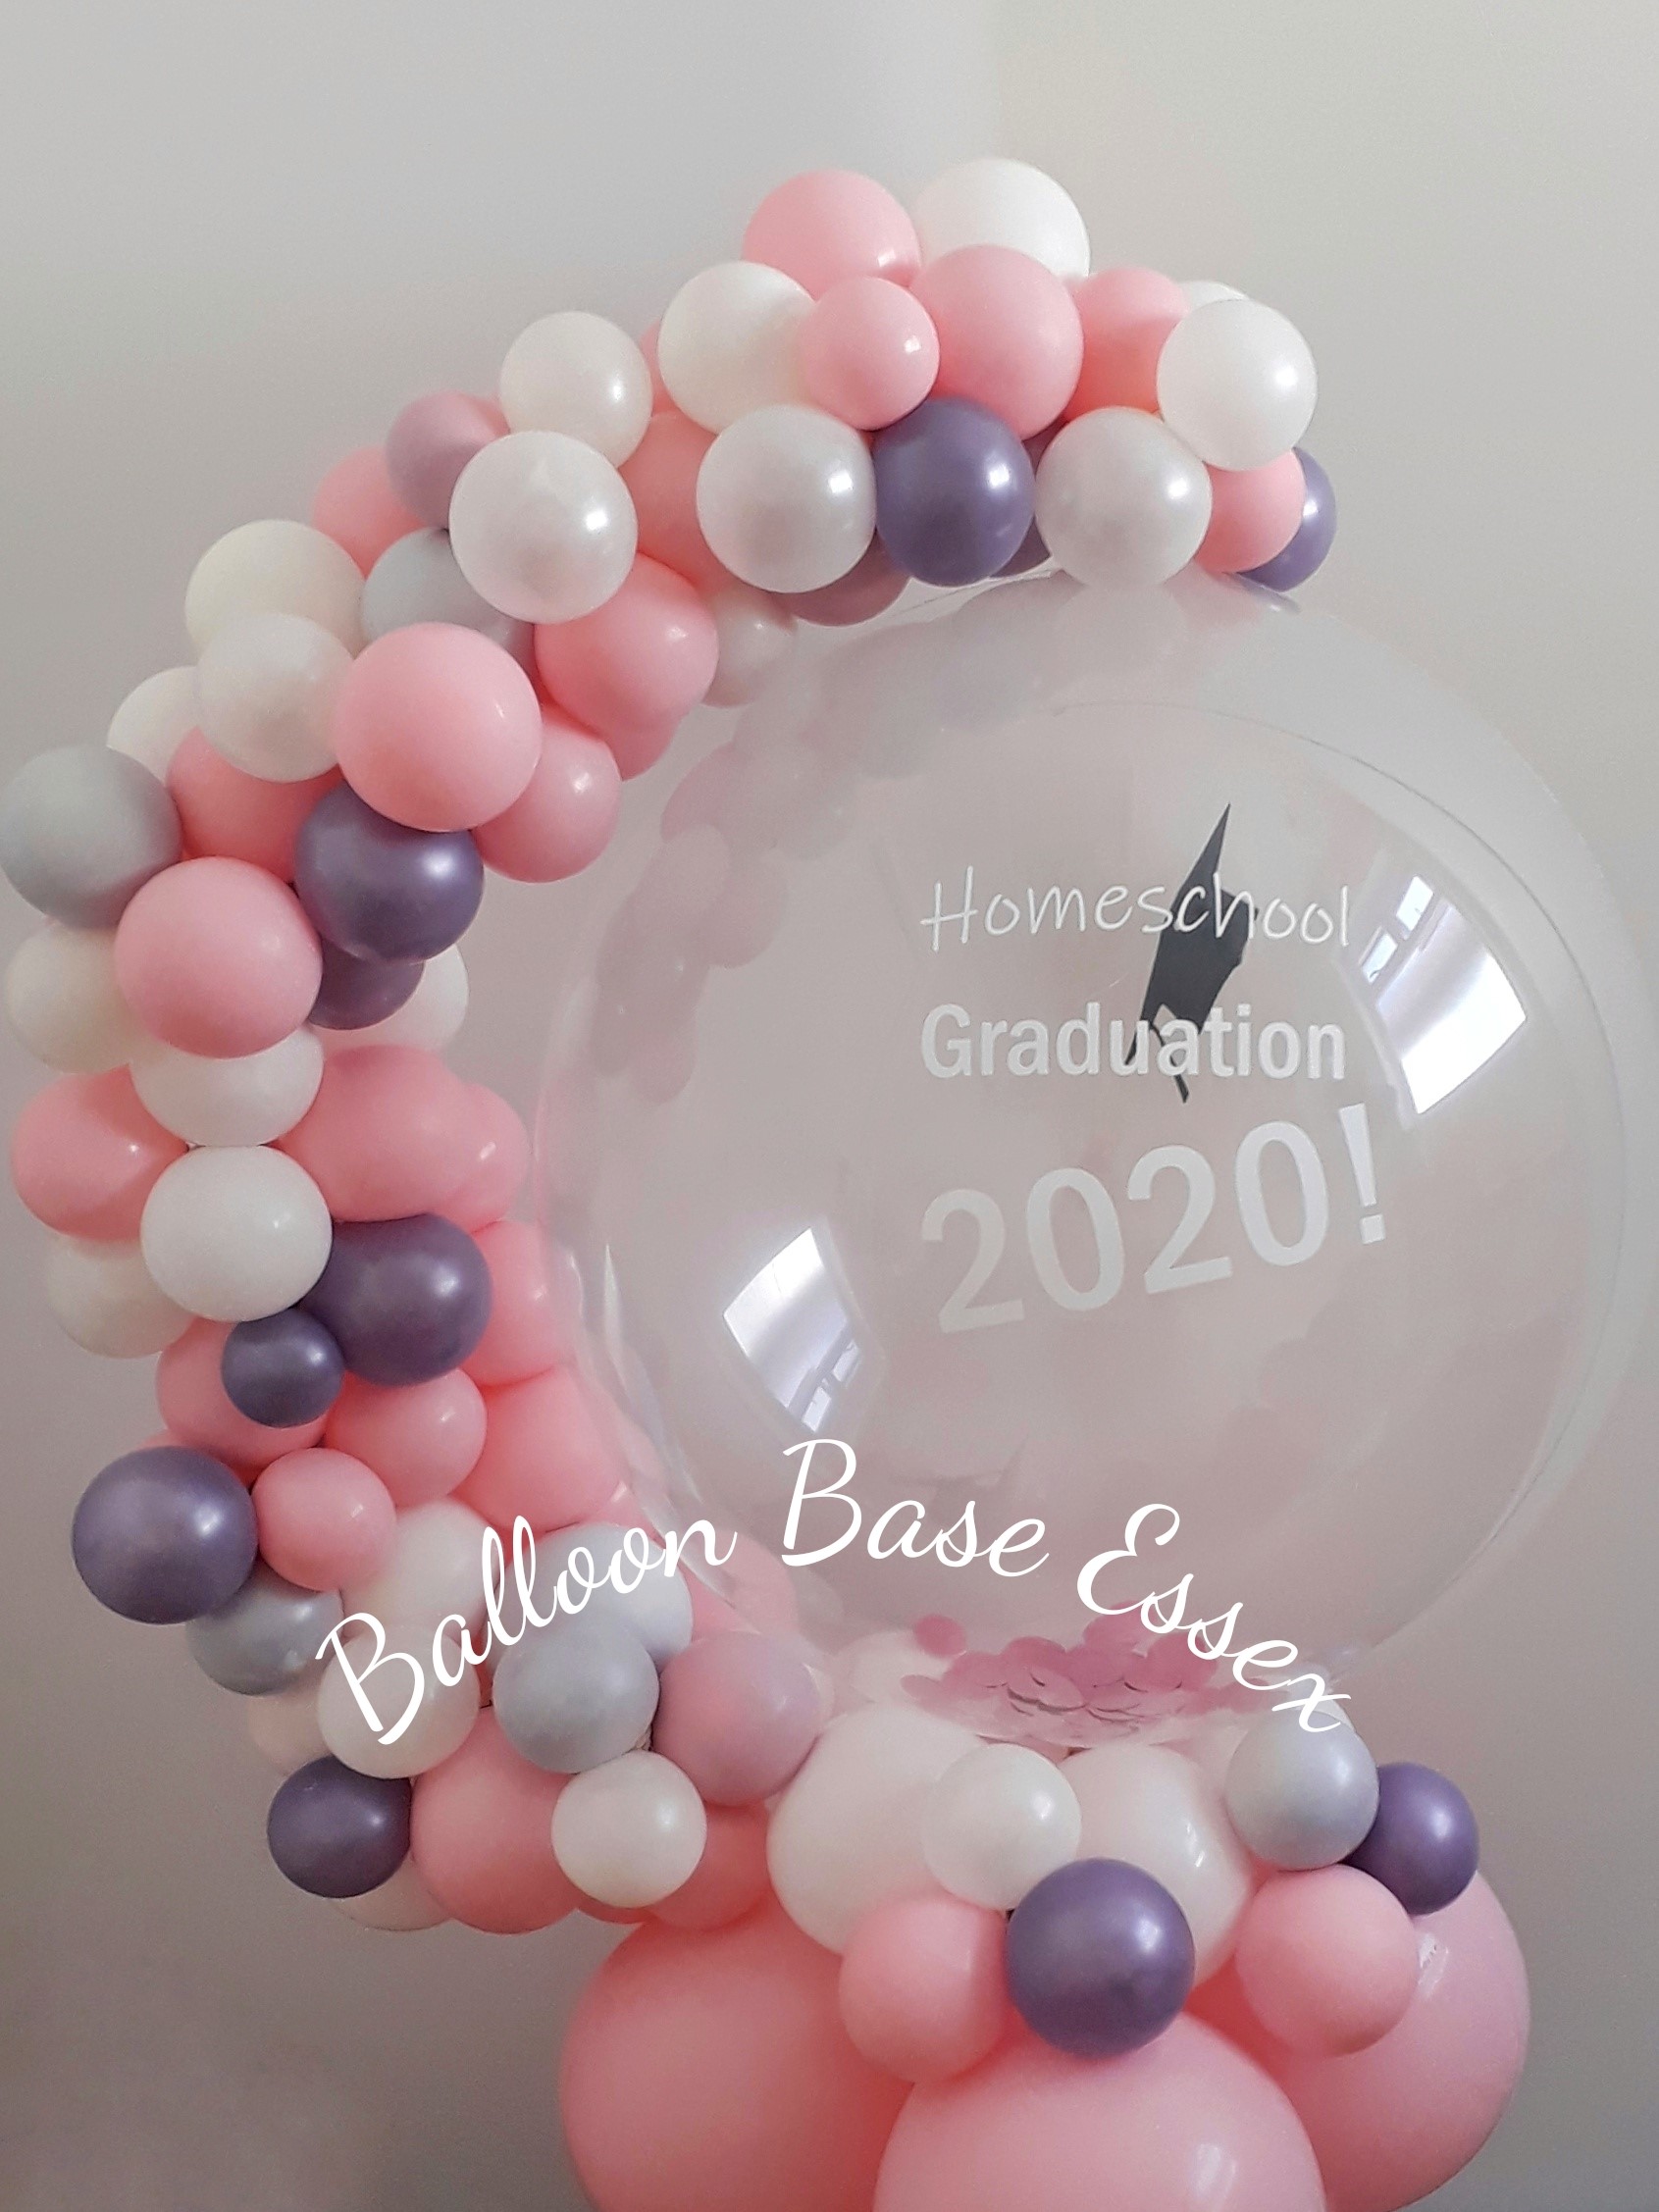 Balloon hug style celebrating end of home schooling